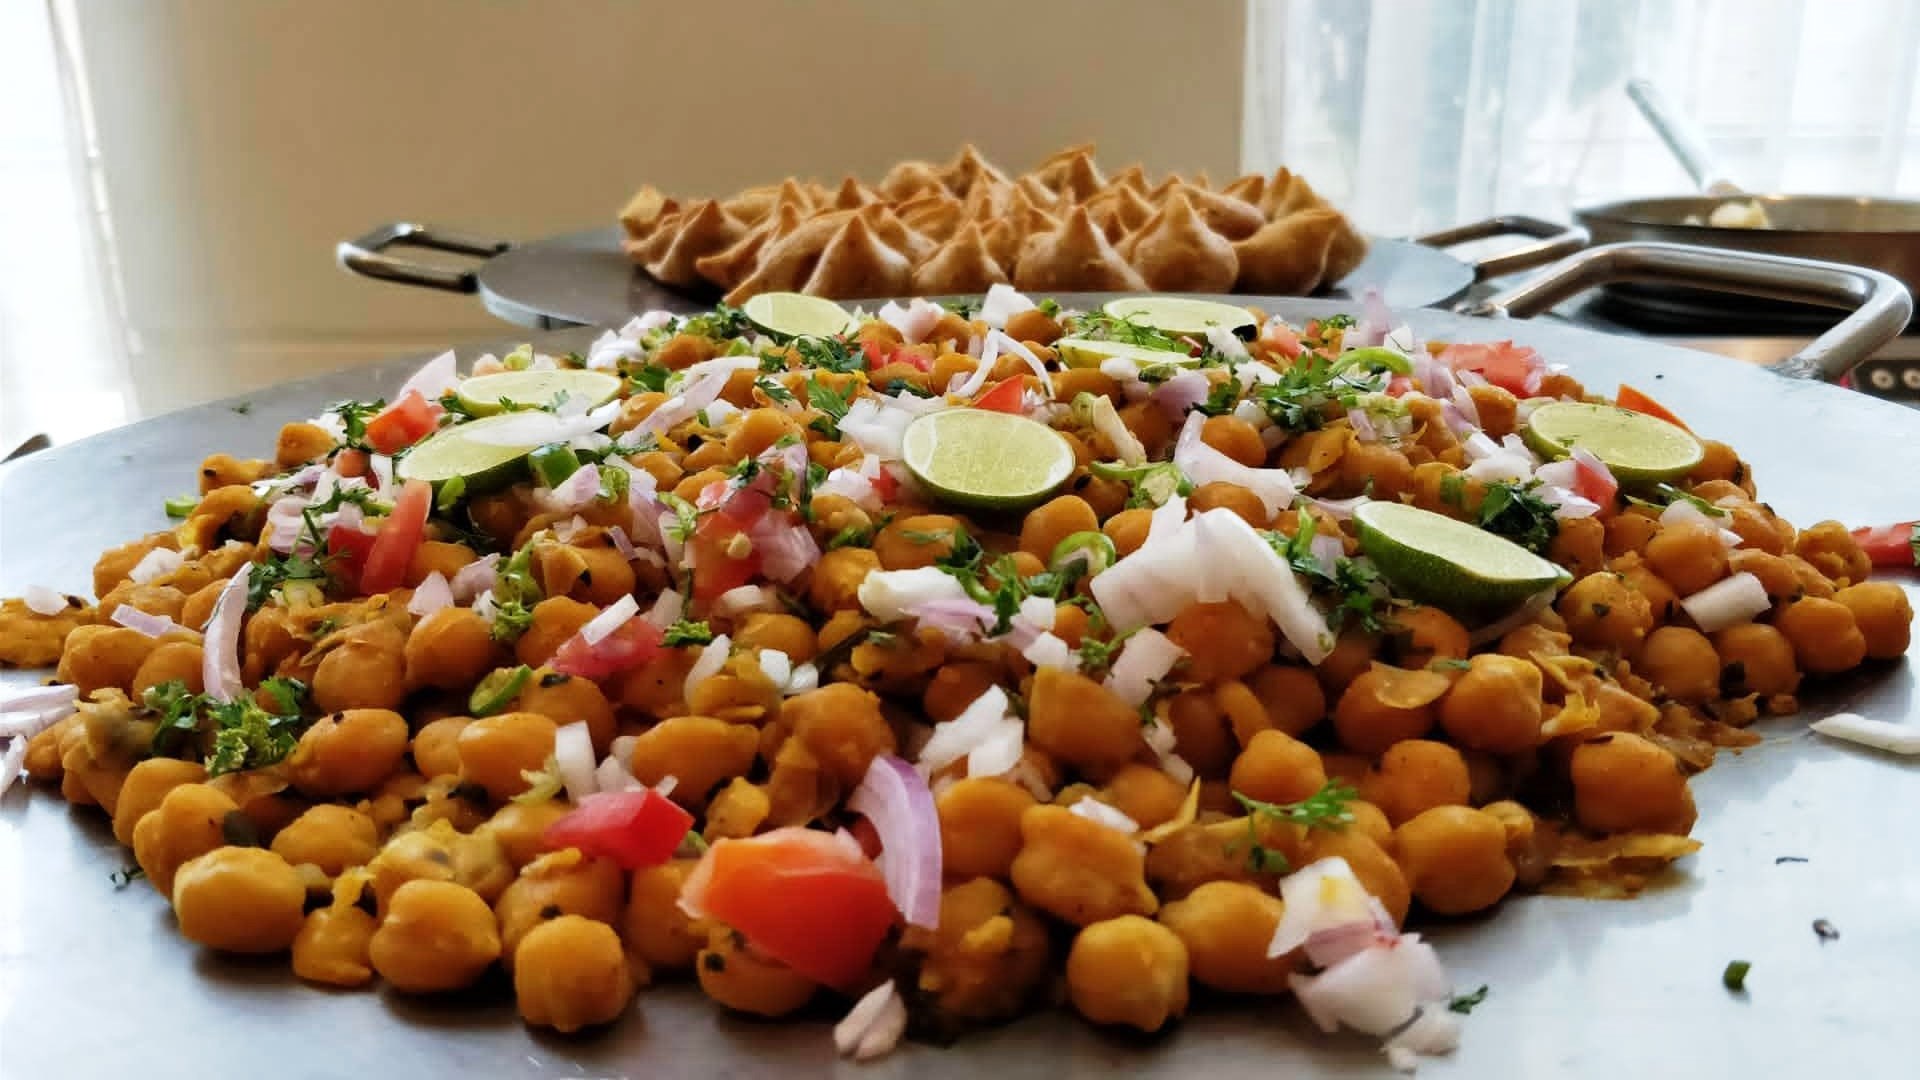 Channa an integral part of the street food delicacies